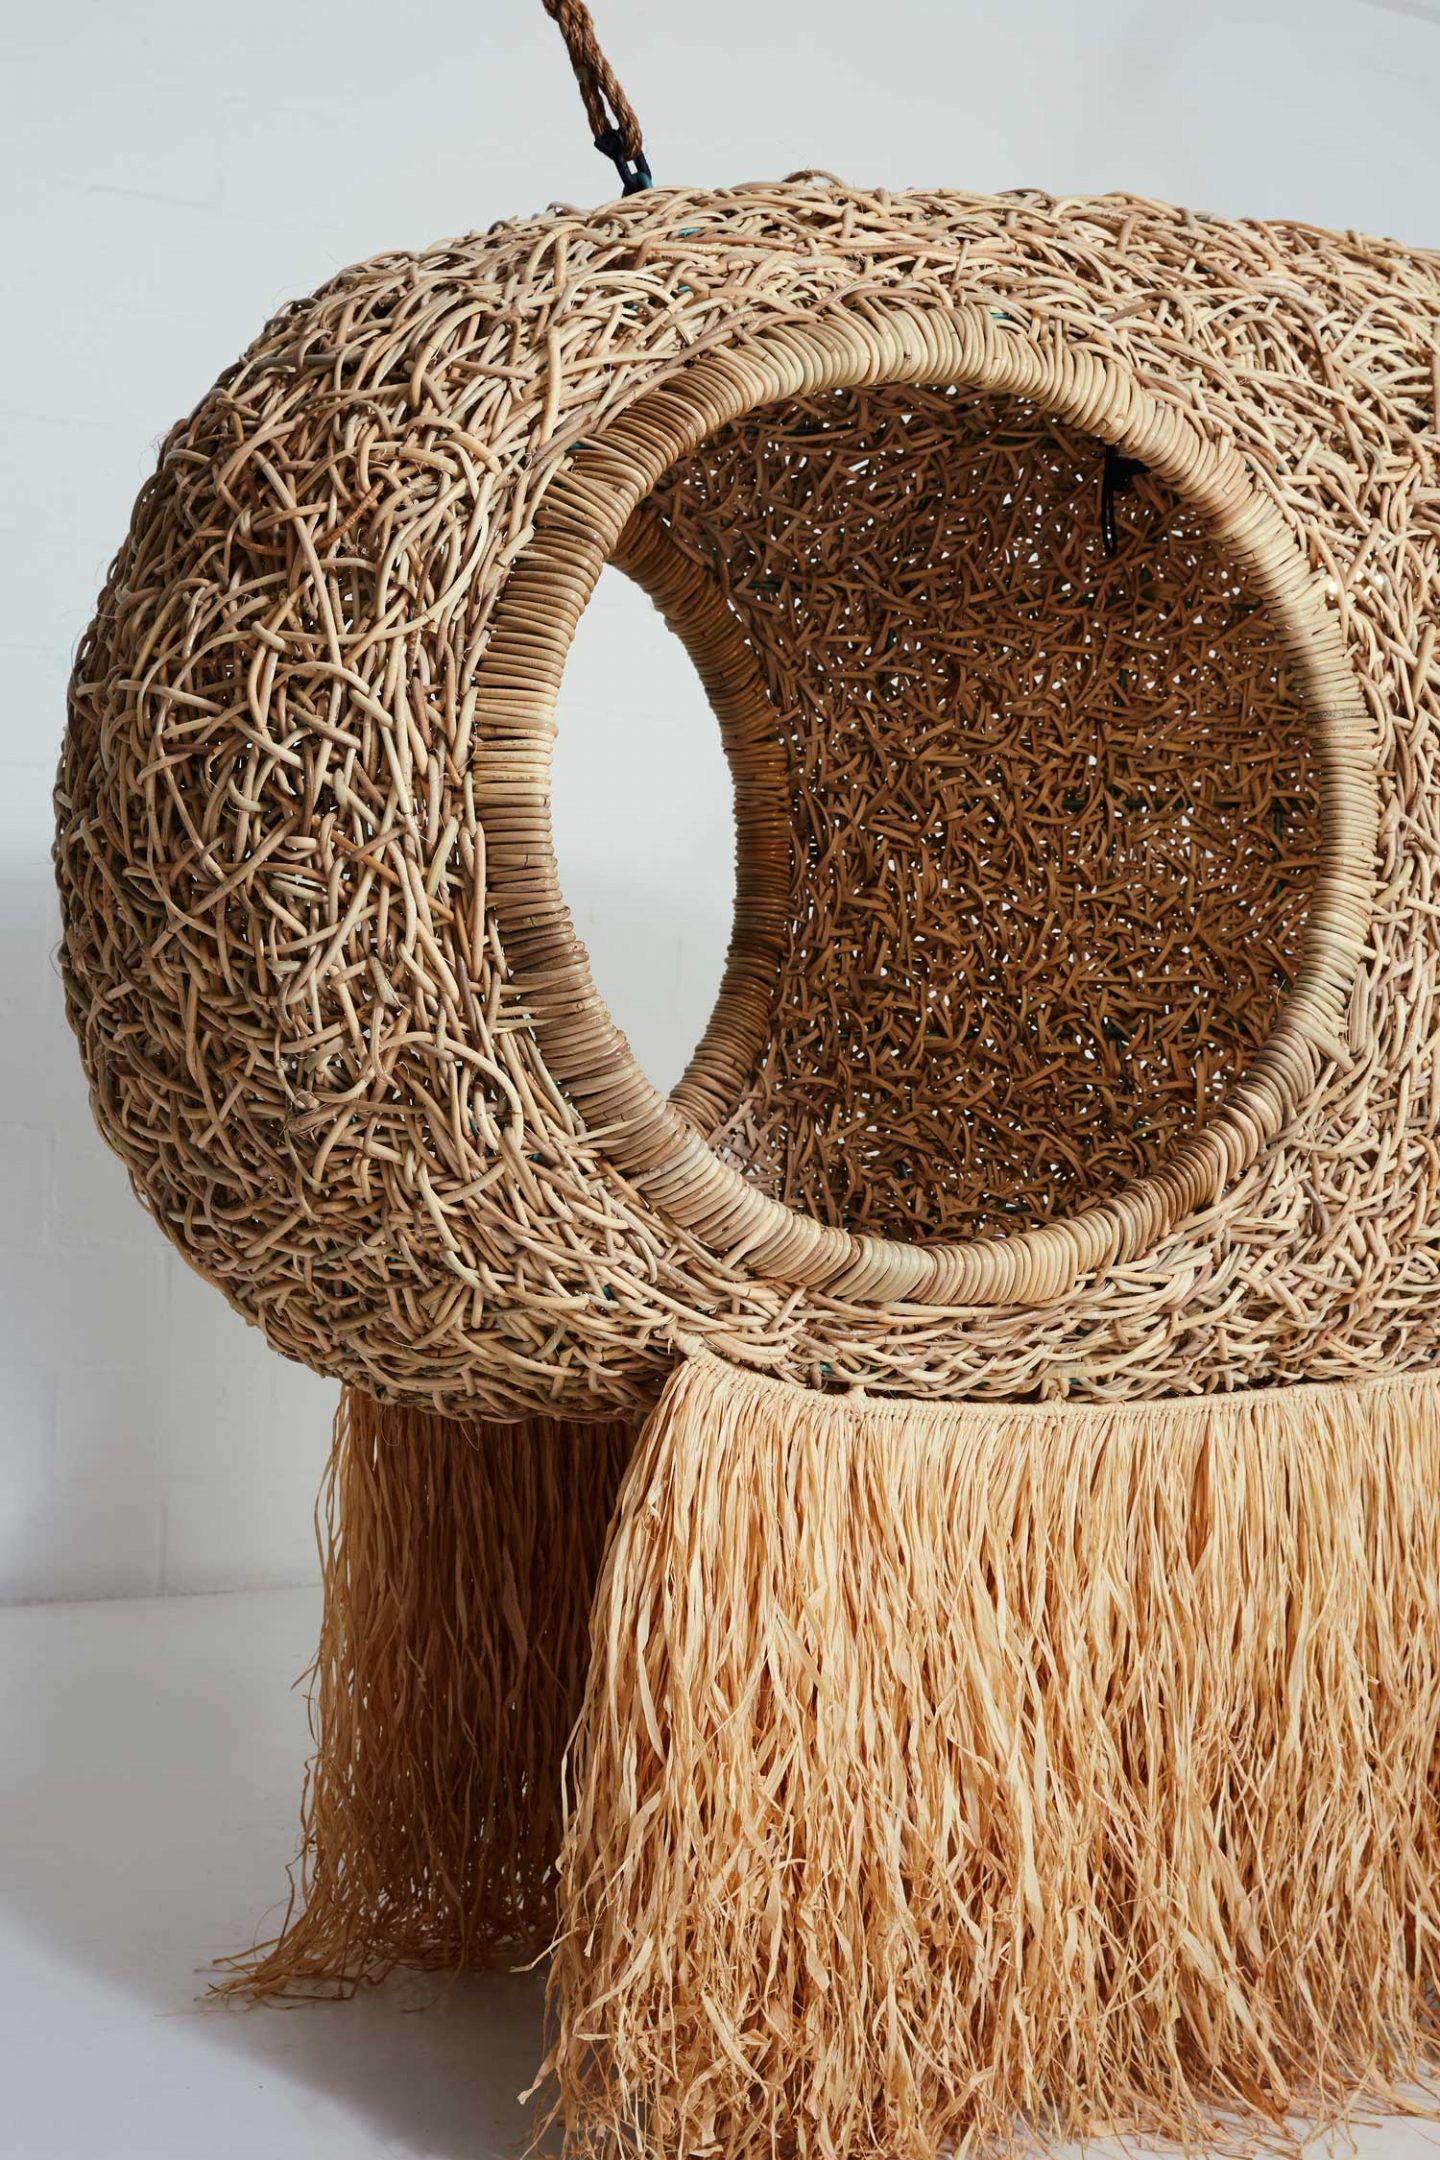 ignant_design_Suspended-Sofas-Cocoons-and-Nests-by-Porky-Hefer_004